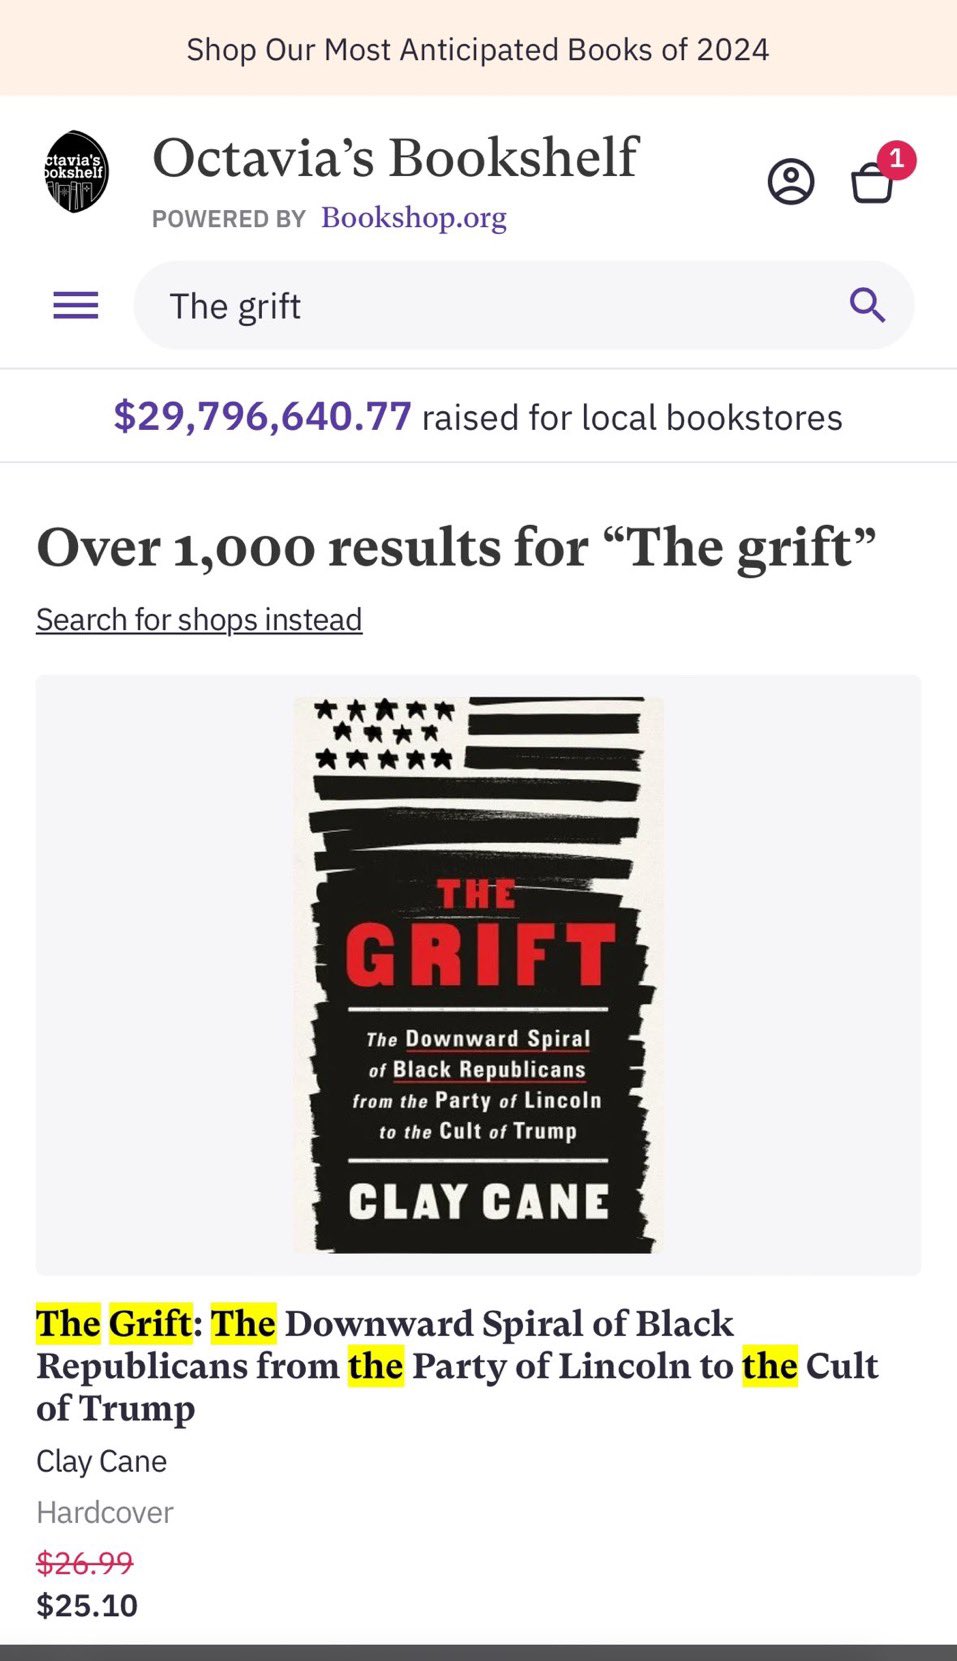  Clay Cane: books, biography, latest update